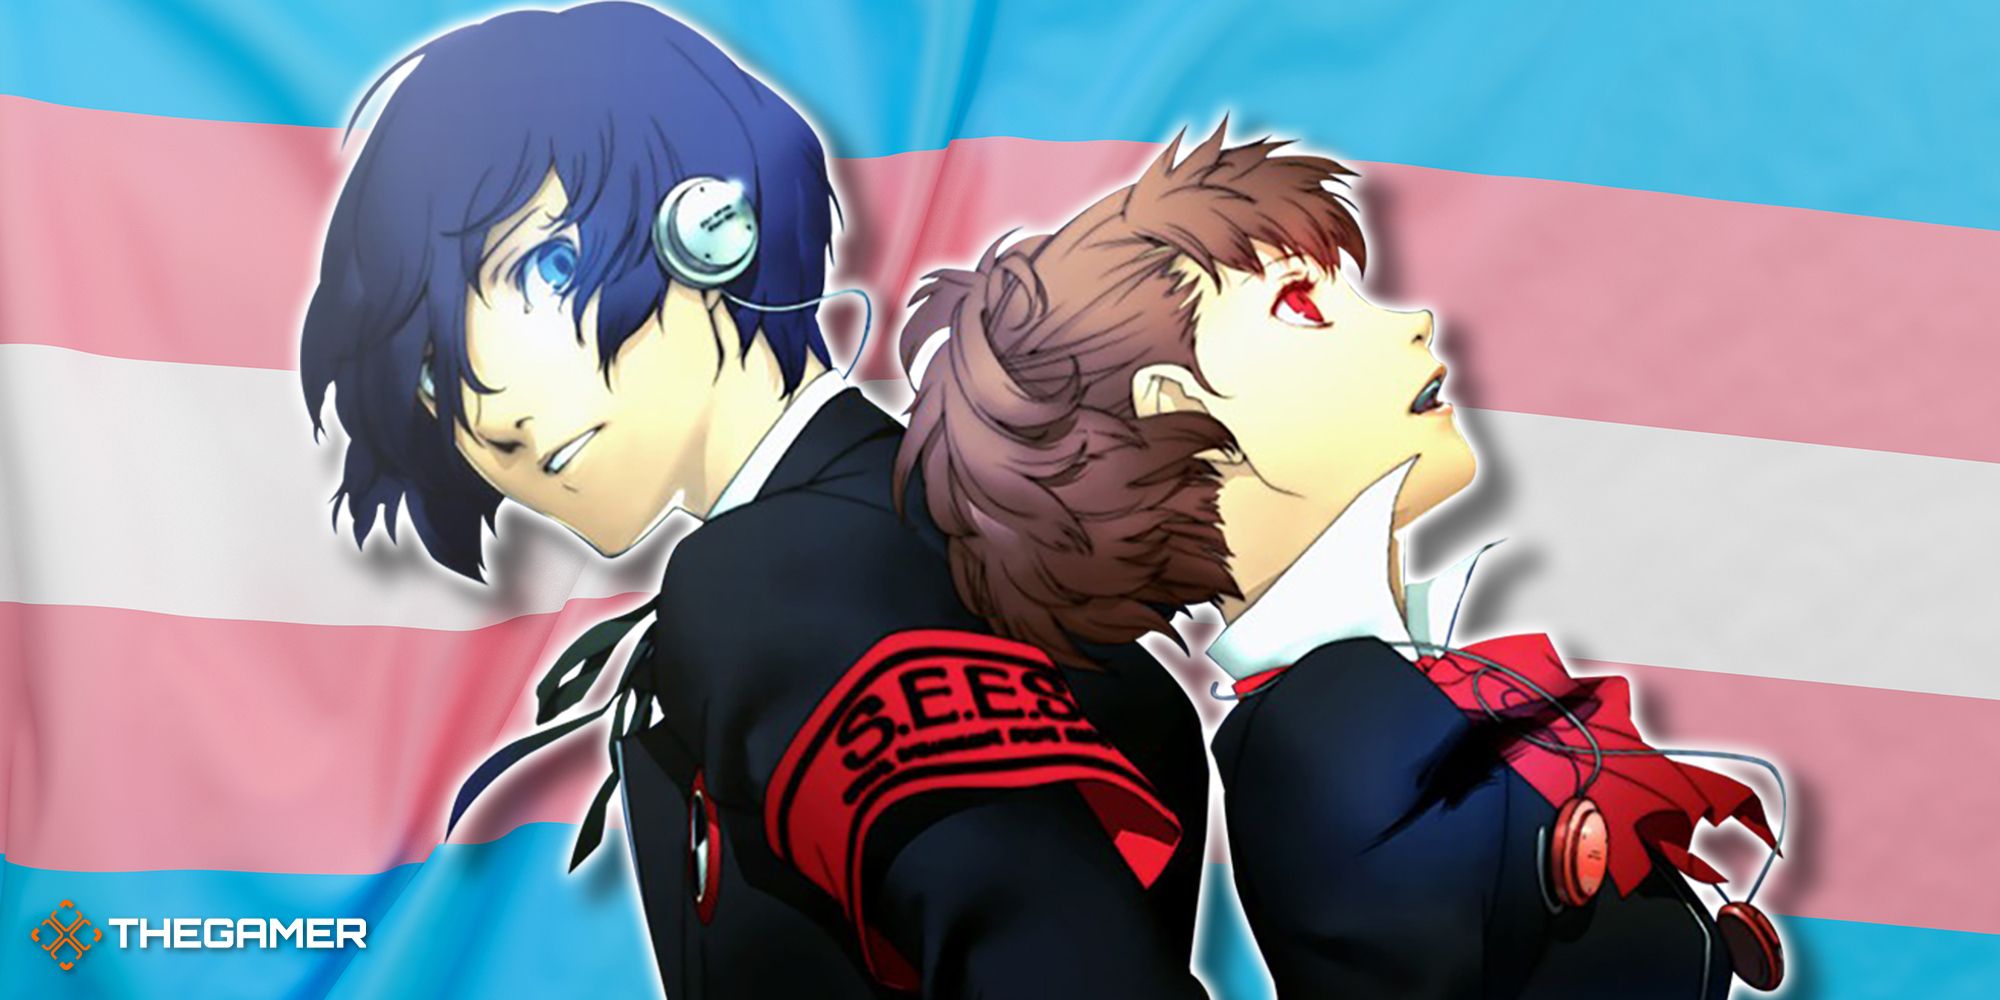 Persona 3 Portable's Female Protagonist Is A Misogynistic Relic Of Its Time